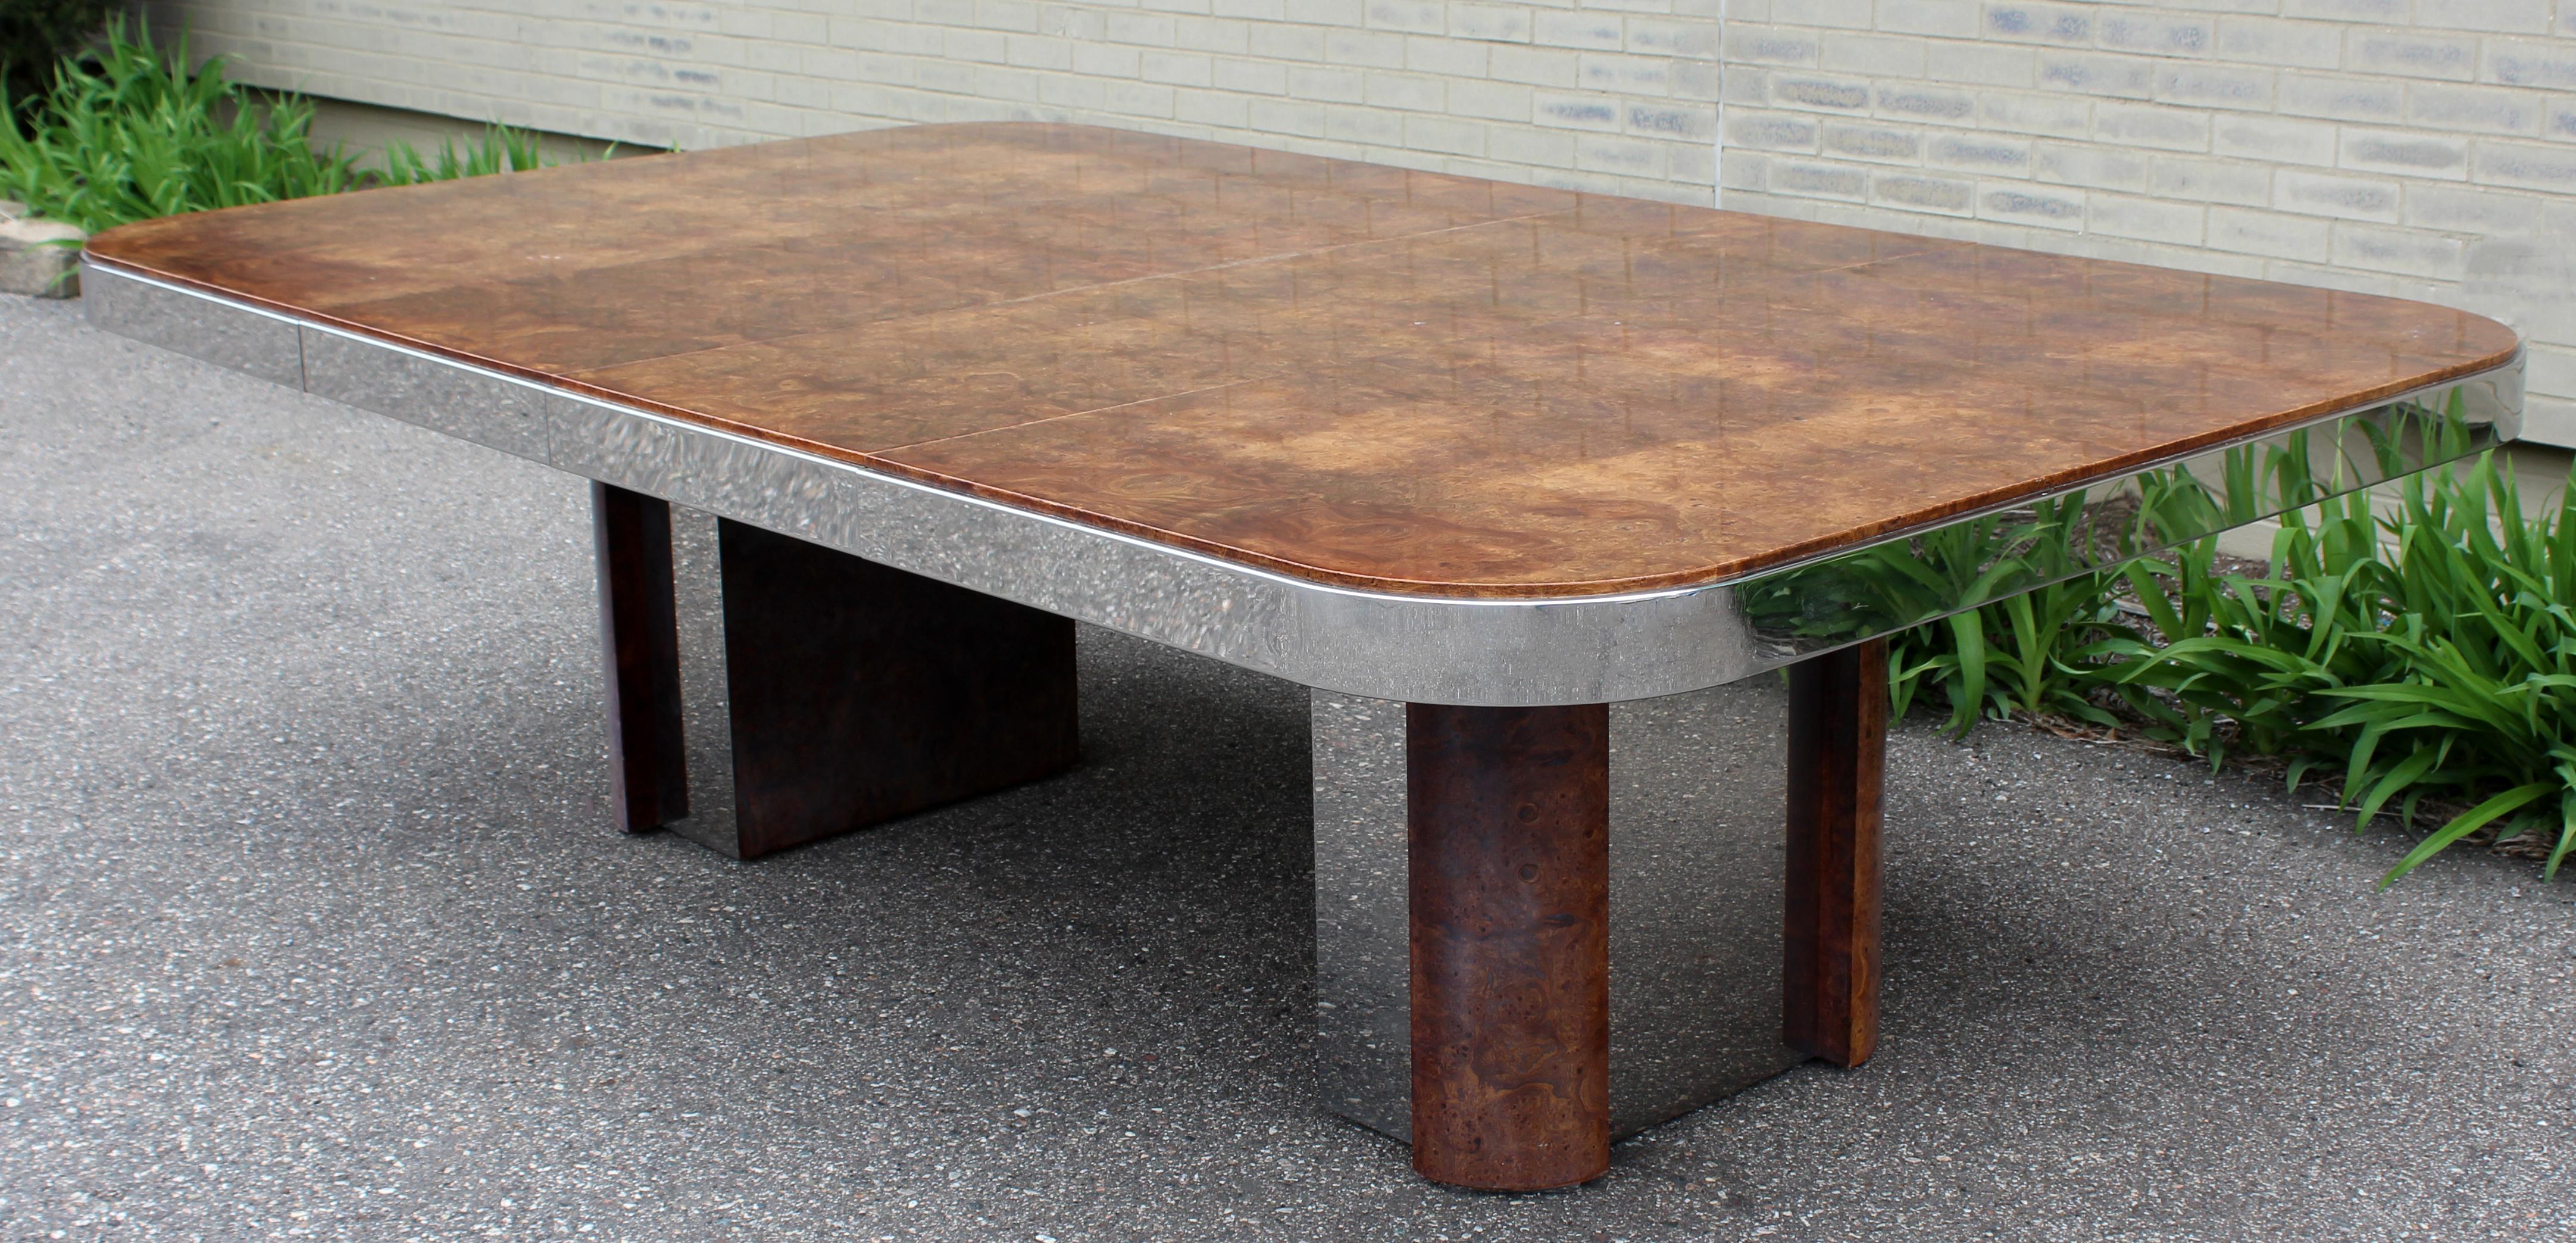 For your consideration is an utterly fabulous, expandable dining table, made of burl wood and chrome, with two leaves, in the style of Milo Baughman or Paul Evans, by Directional, circa 1970s. In very good condition, wear consistent with age and